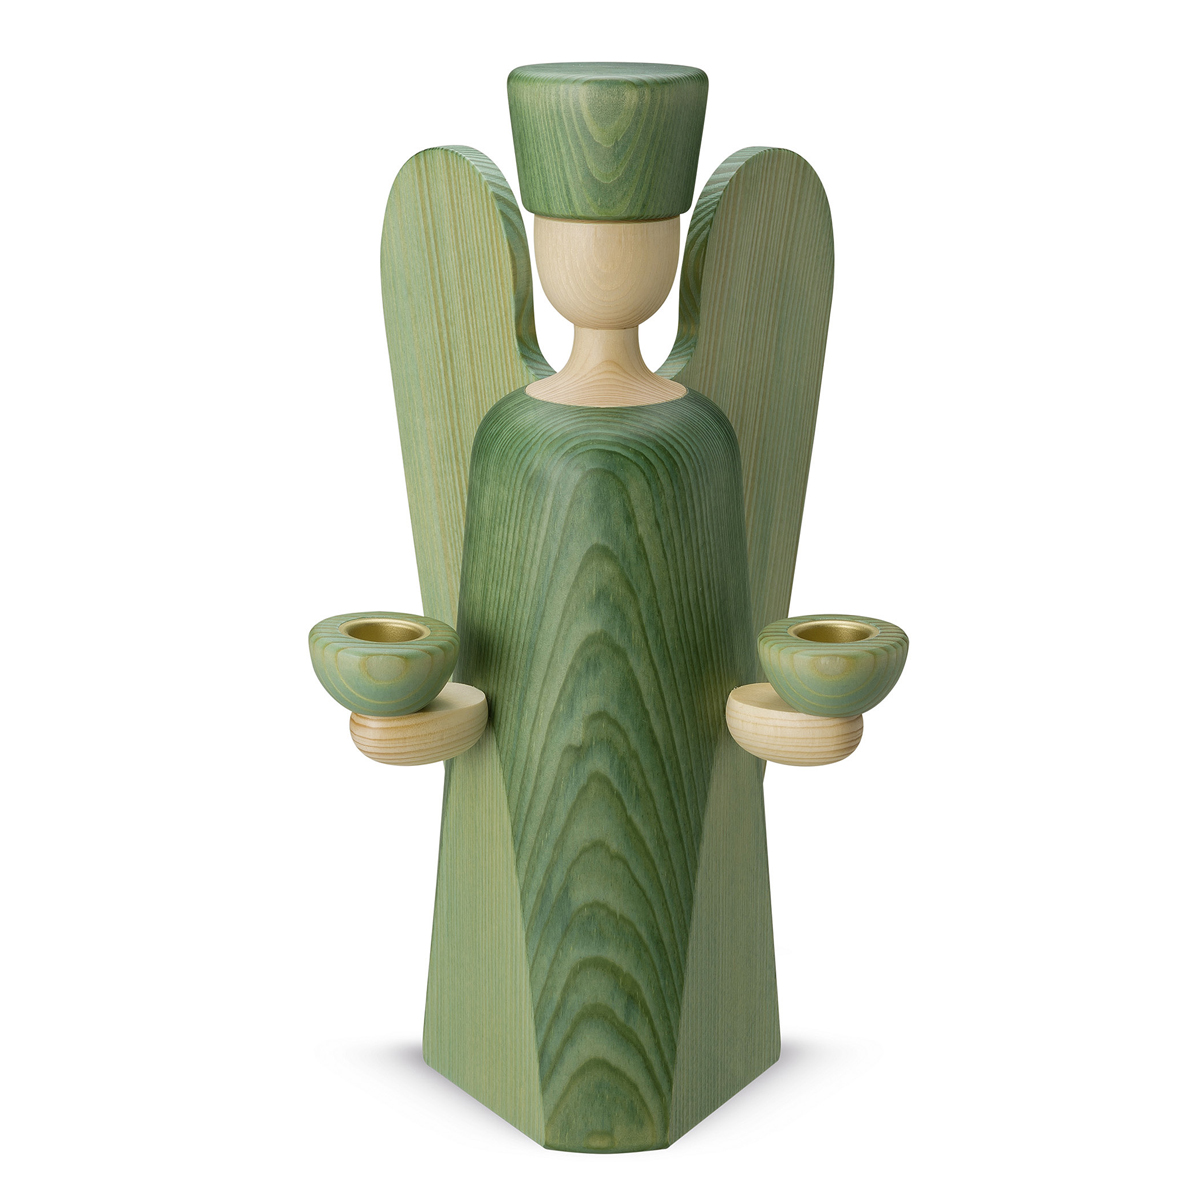  Angel candle holder, large, green